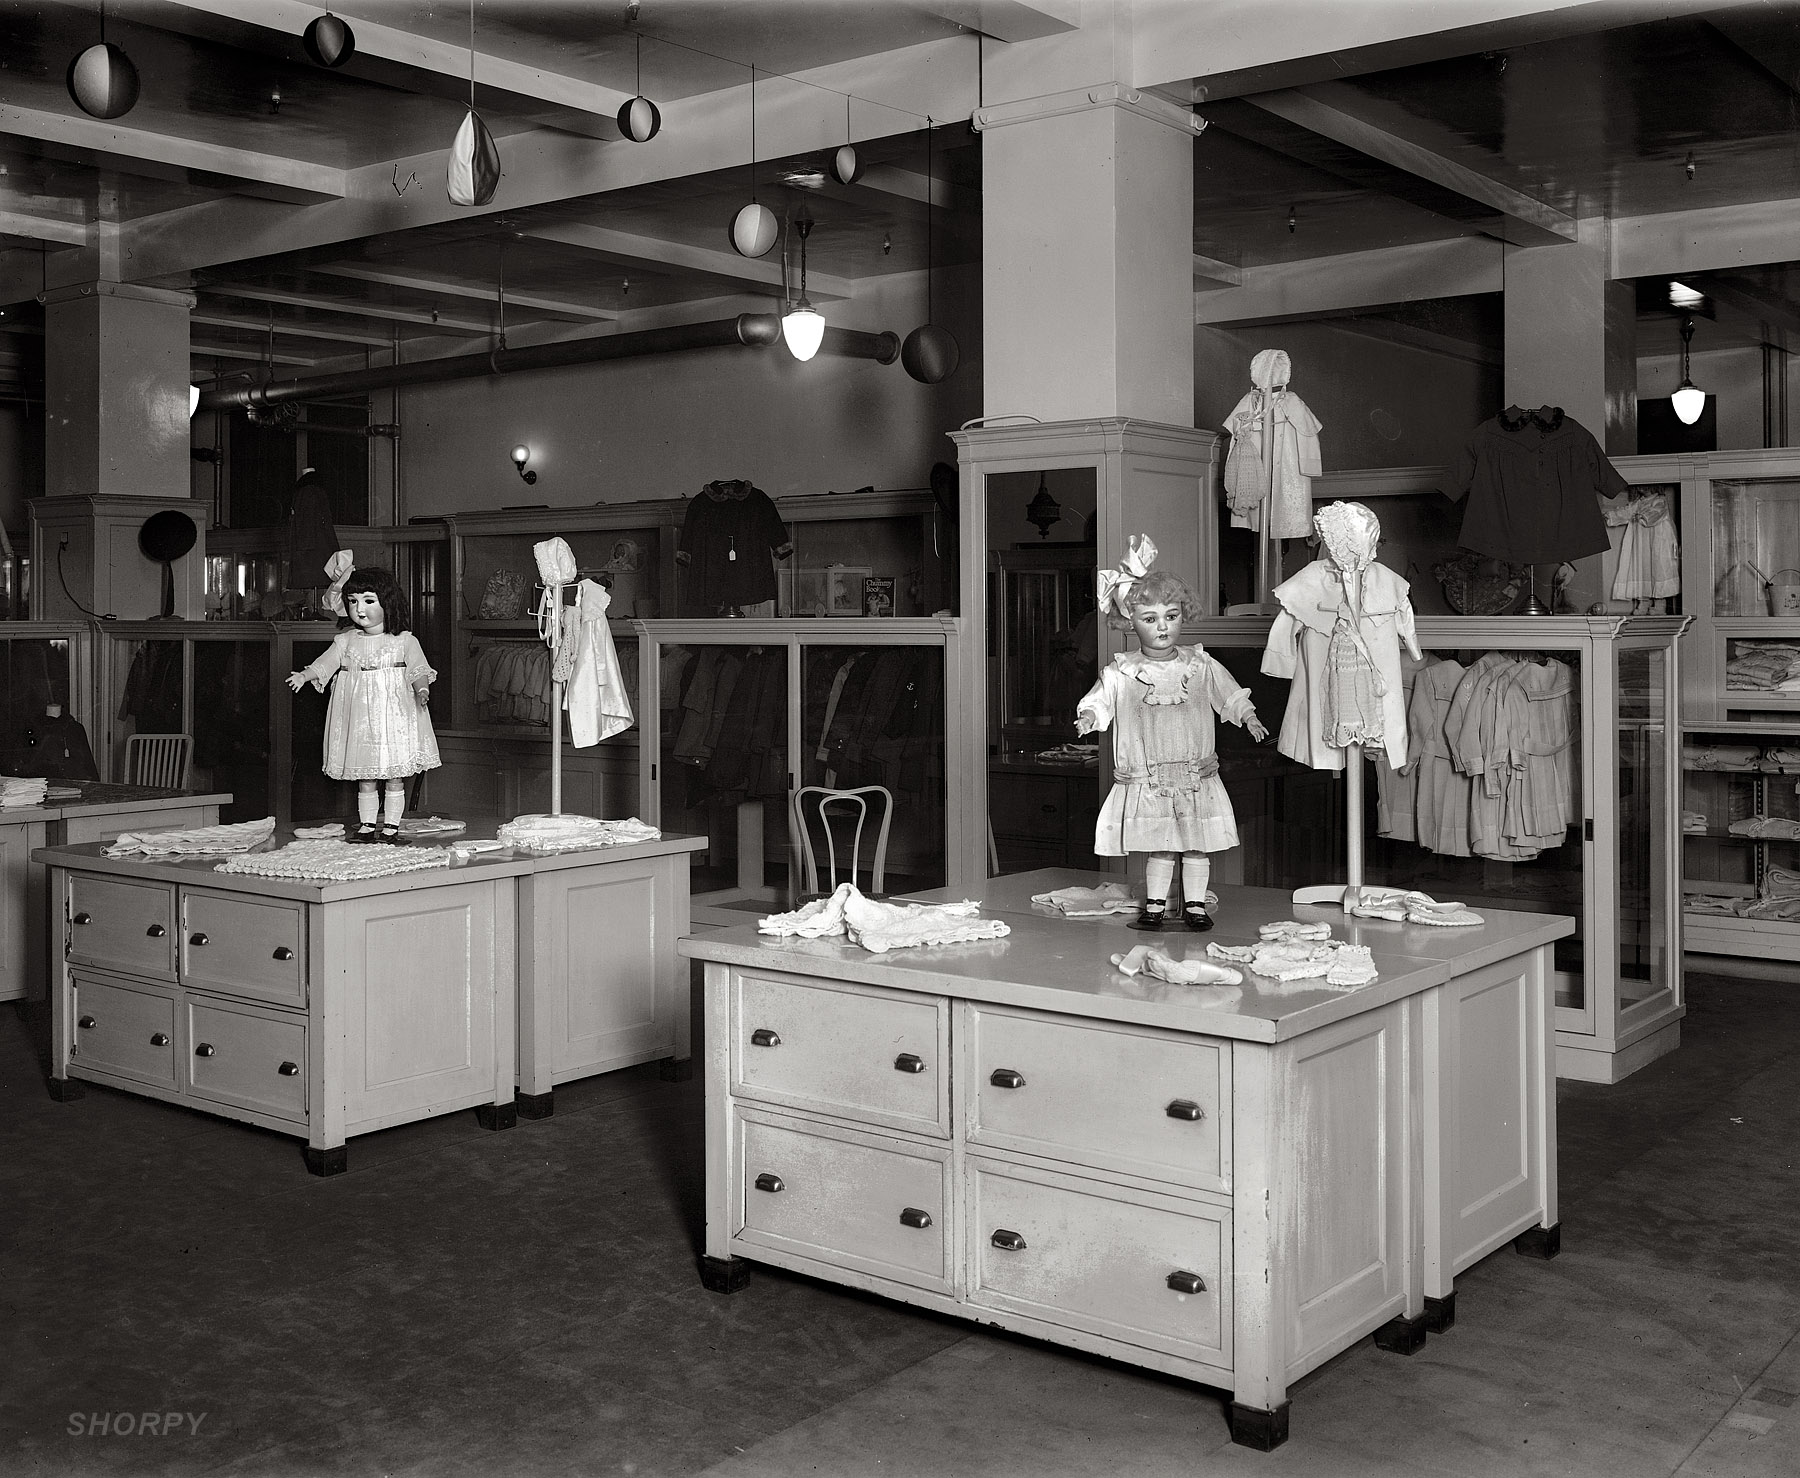 "Mrs. McPherson, interior, Lansburgh." 1921 or 1922. The old Lansburgh department store in Washington, D.C. View full size. National Photo Company.